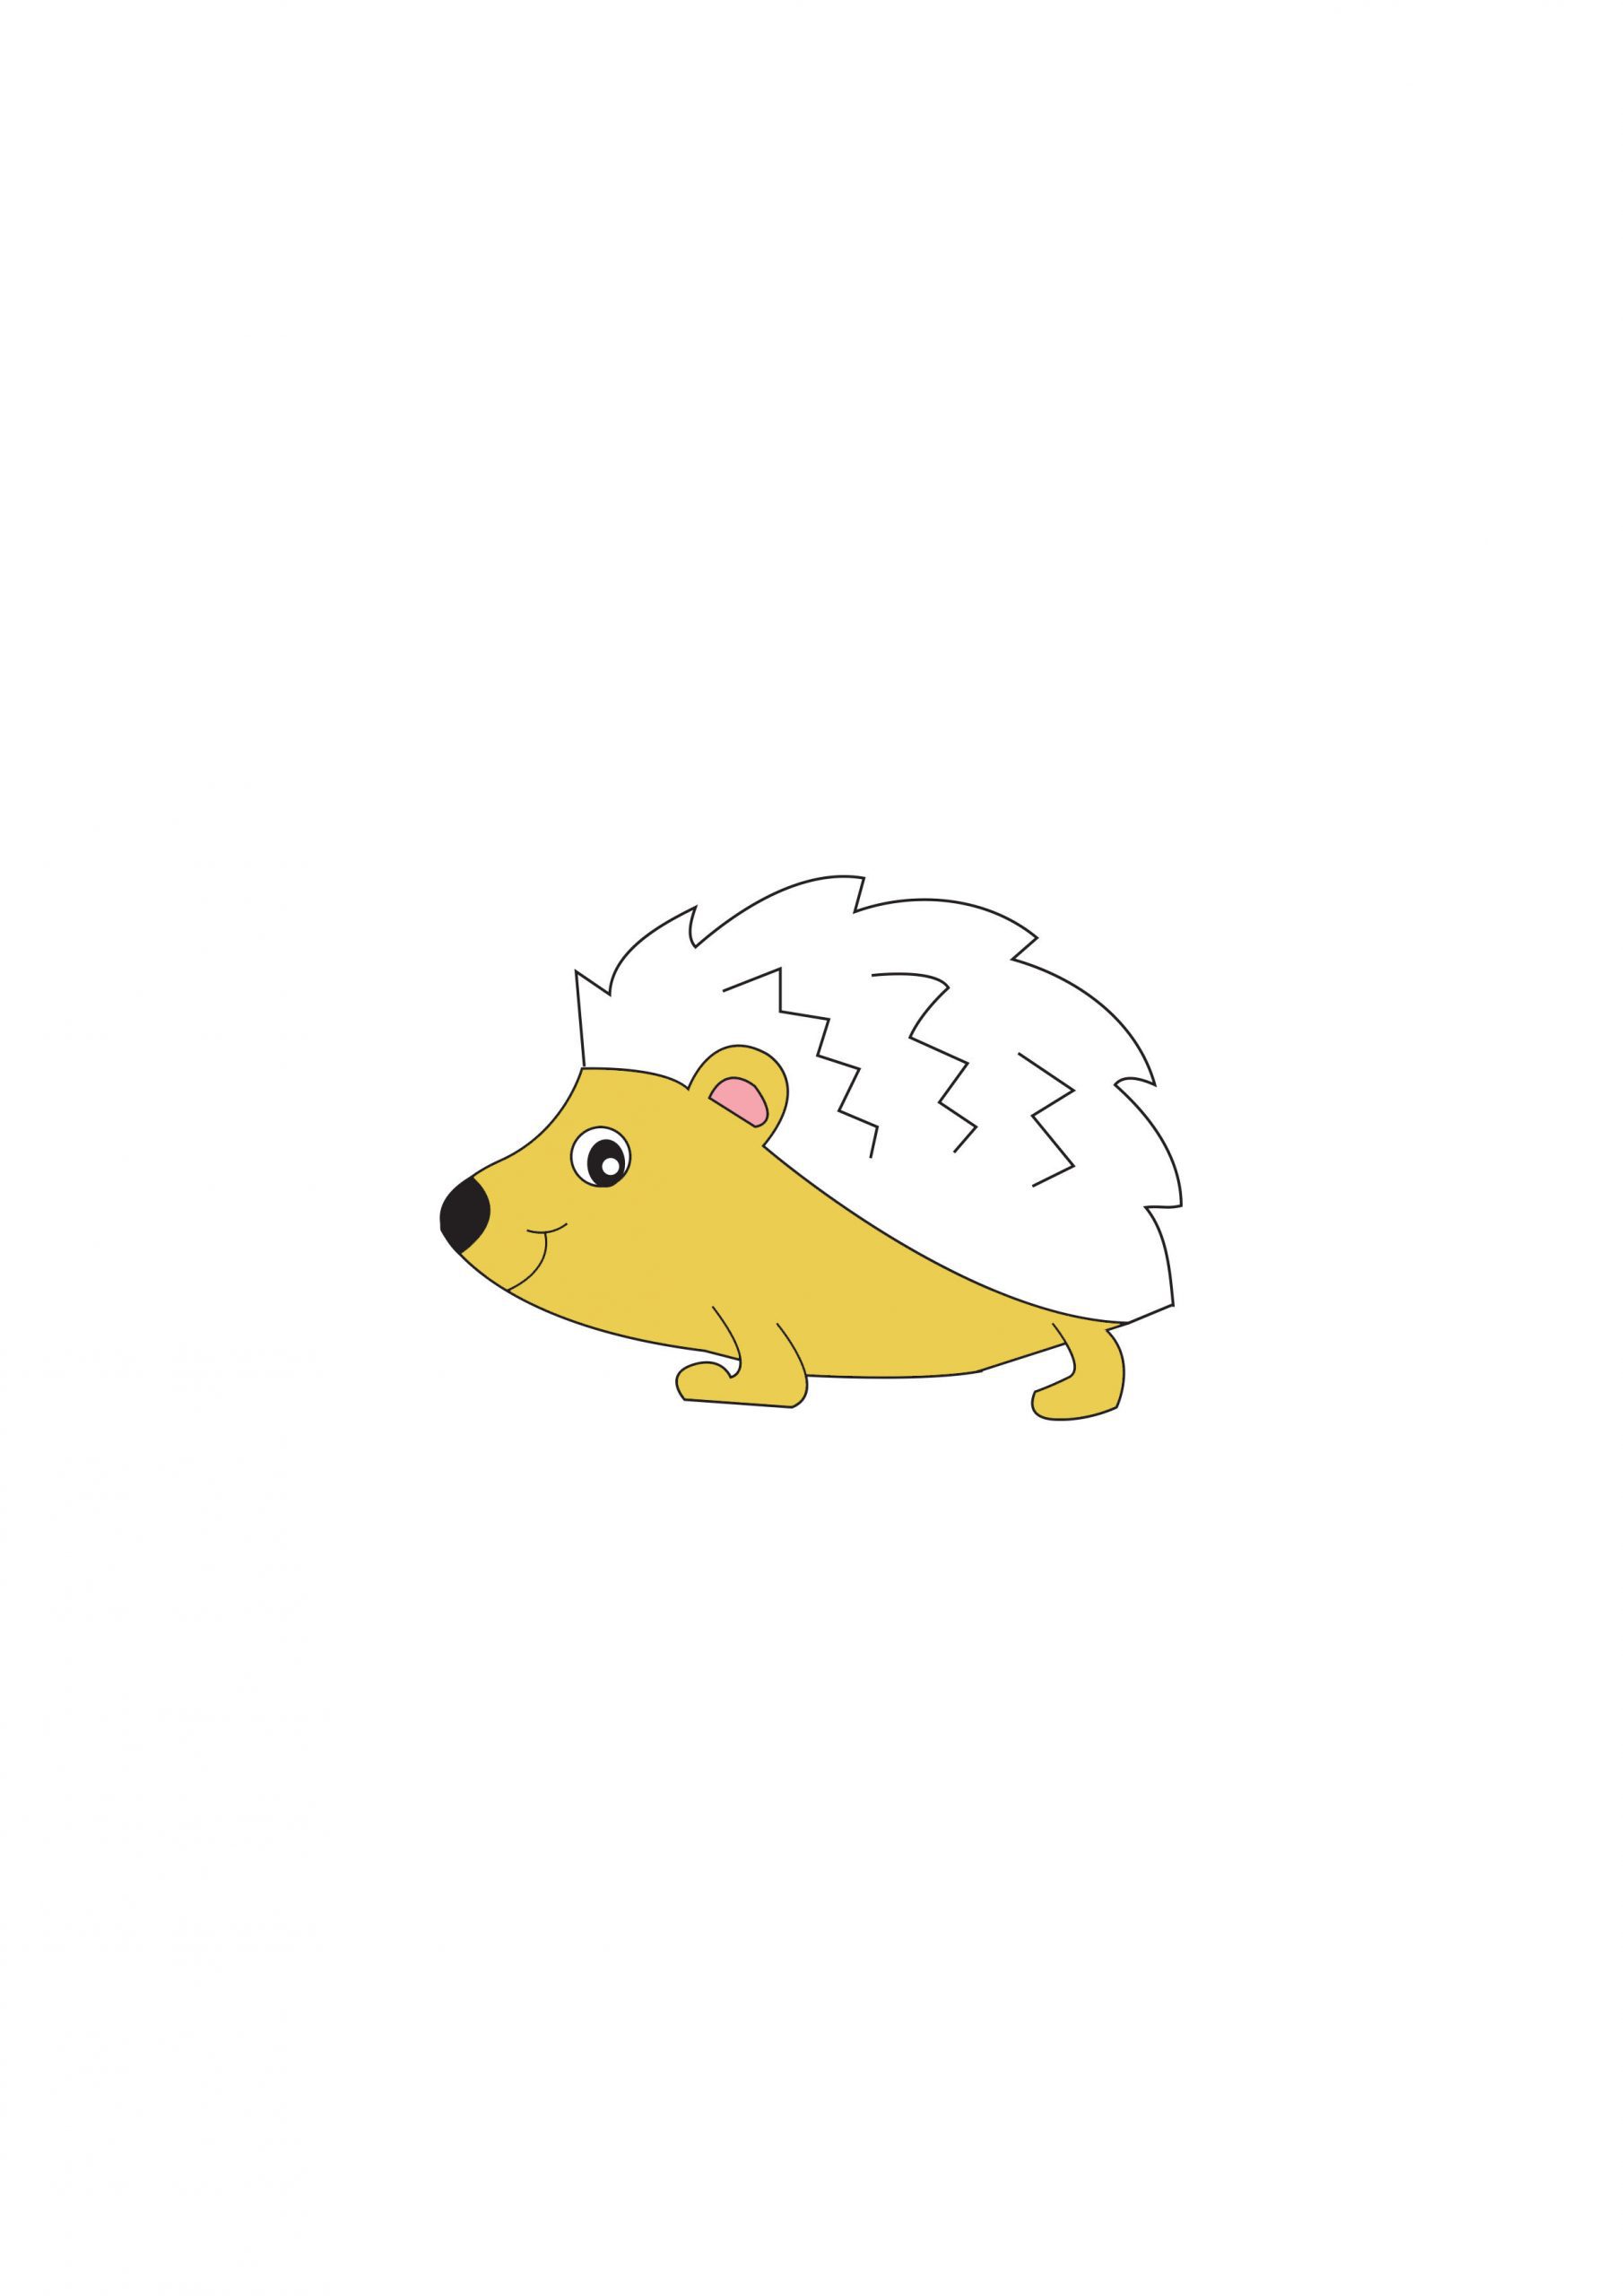 easy hedgehog drawing project for school